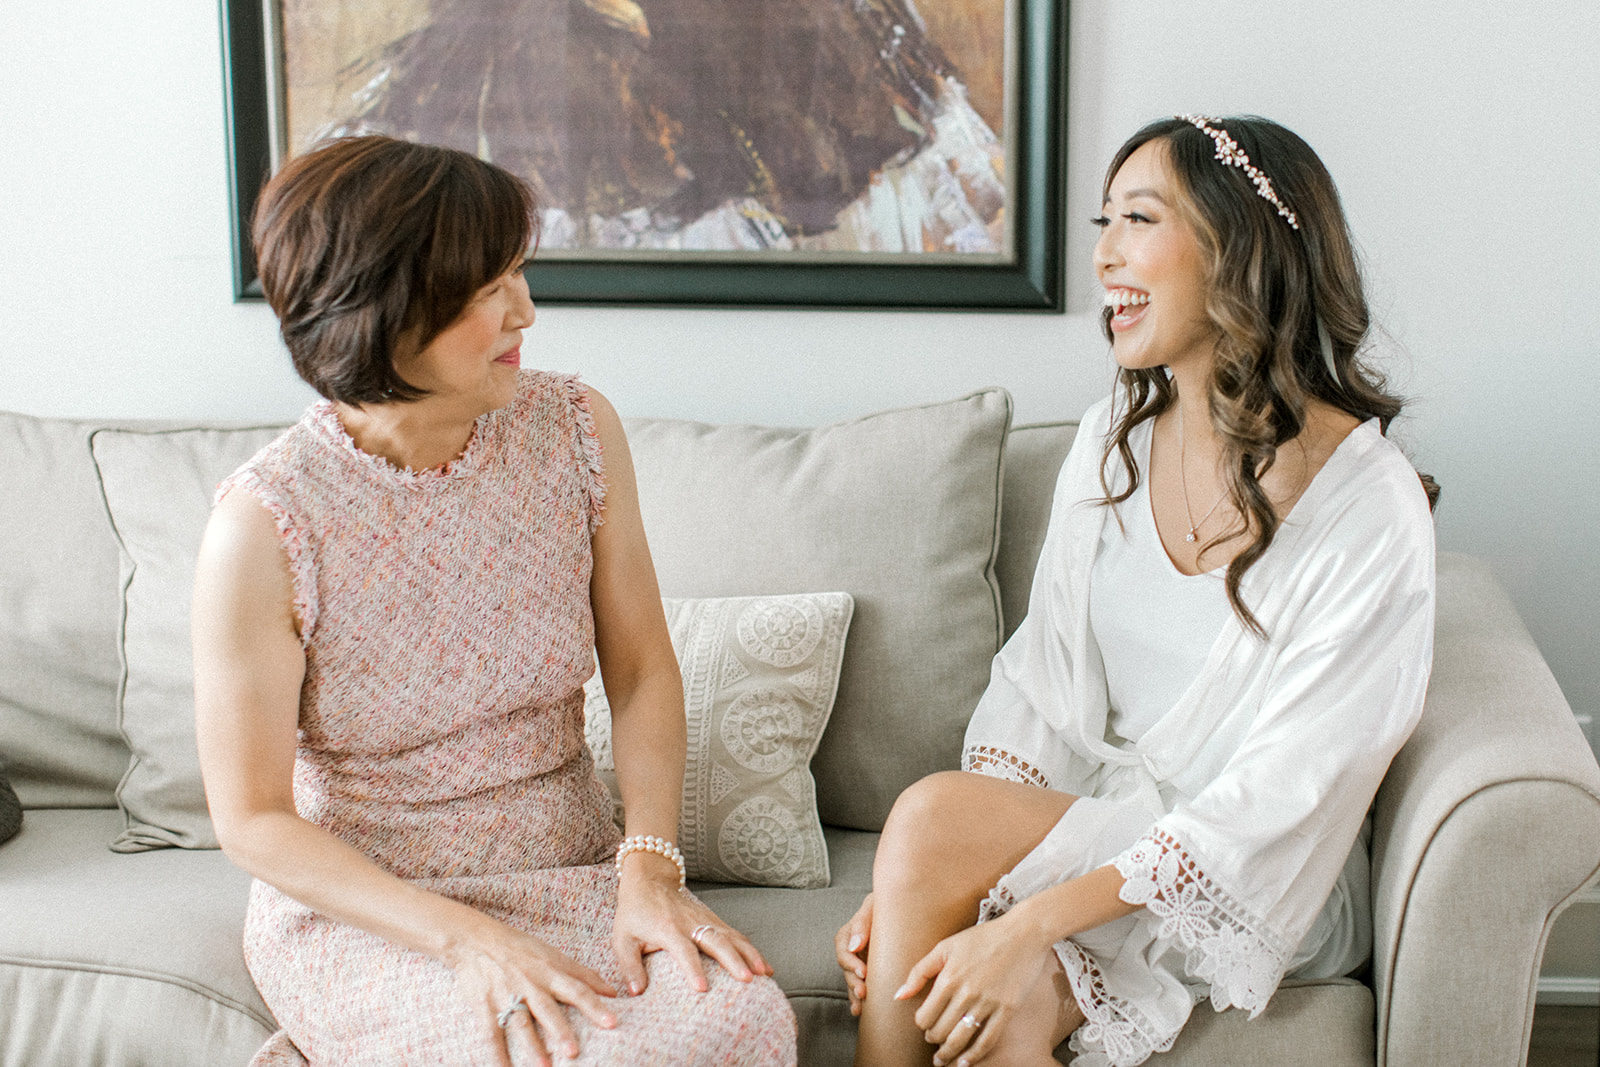 Mom and Daughter laugh together while getting ready on wedding day